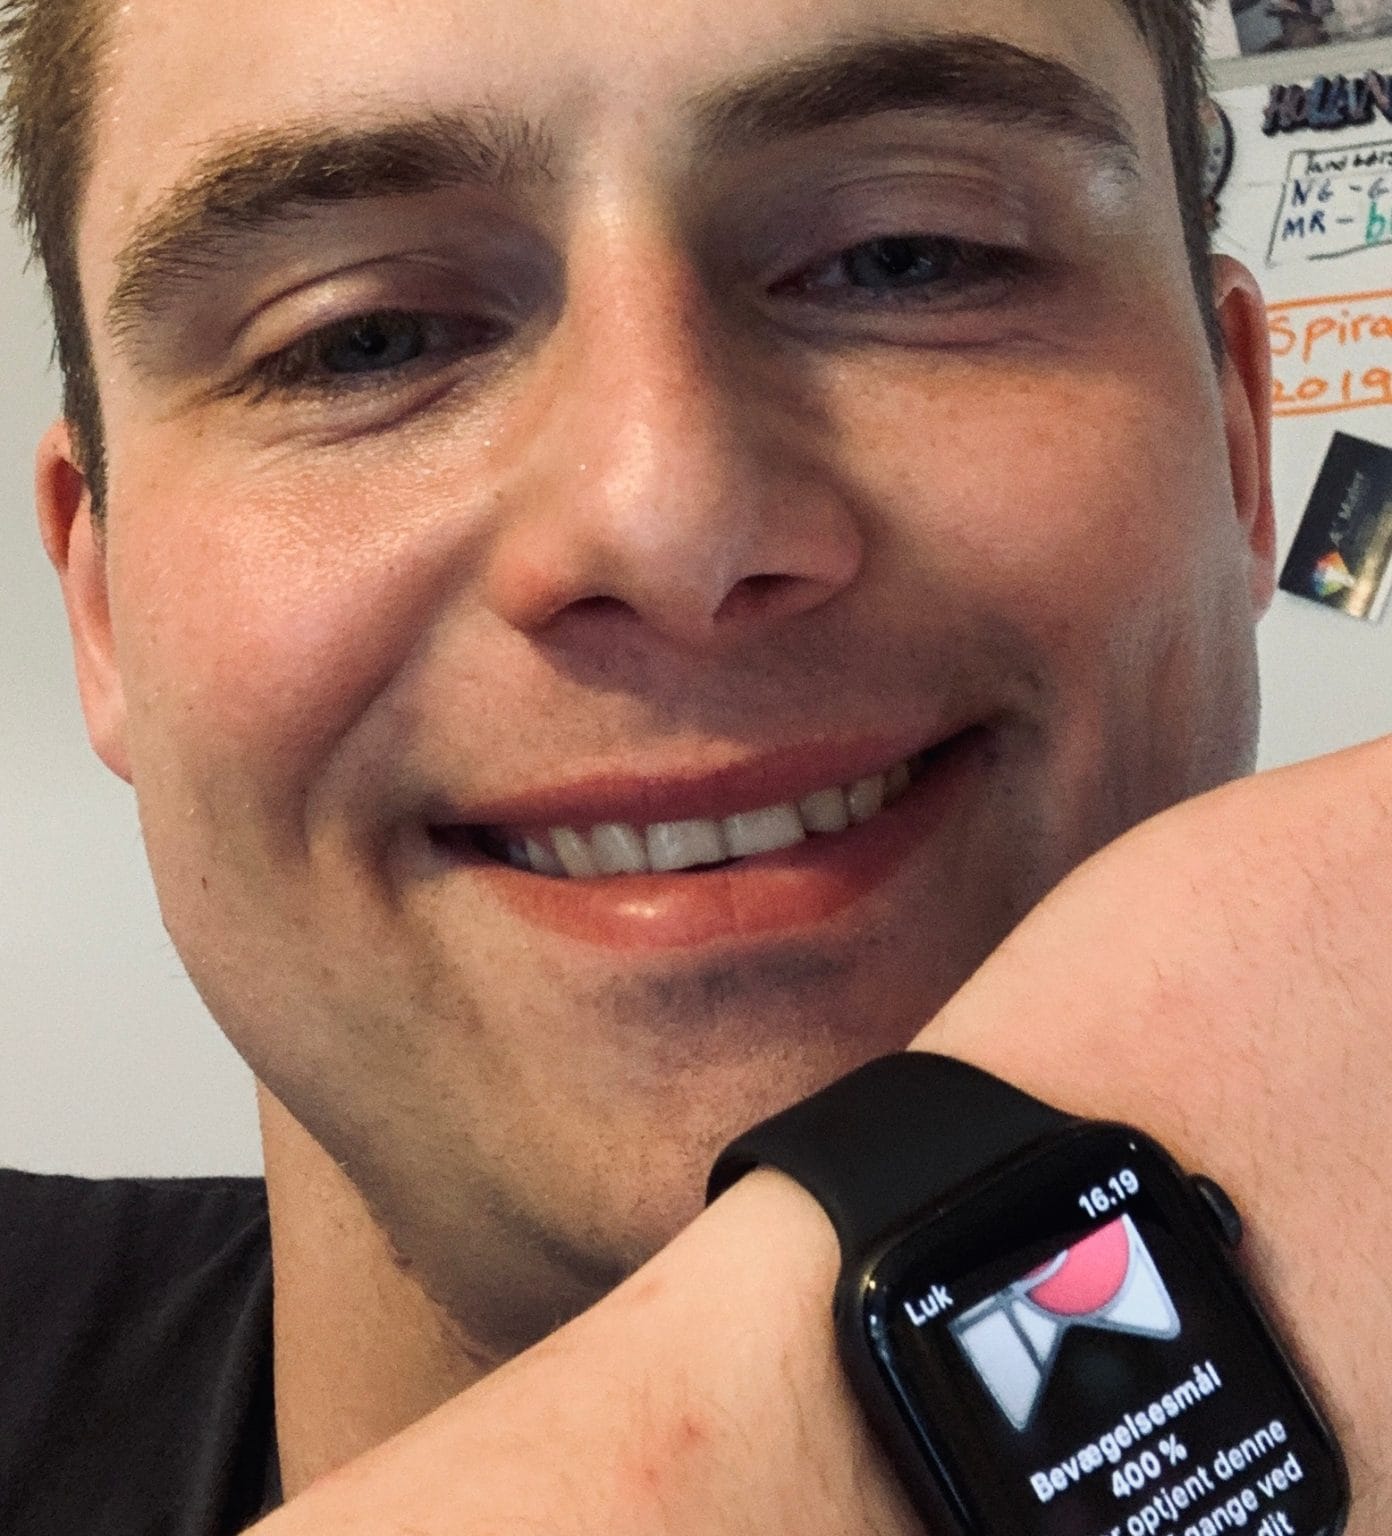 Apple Watch helps people like Sune Holt stay fit during COVID-19 chaos.